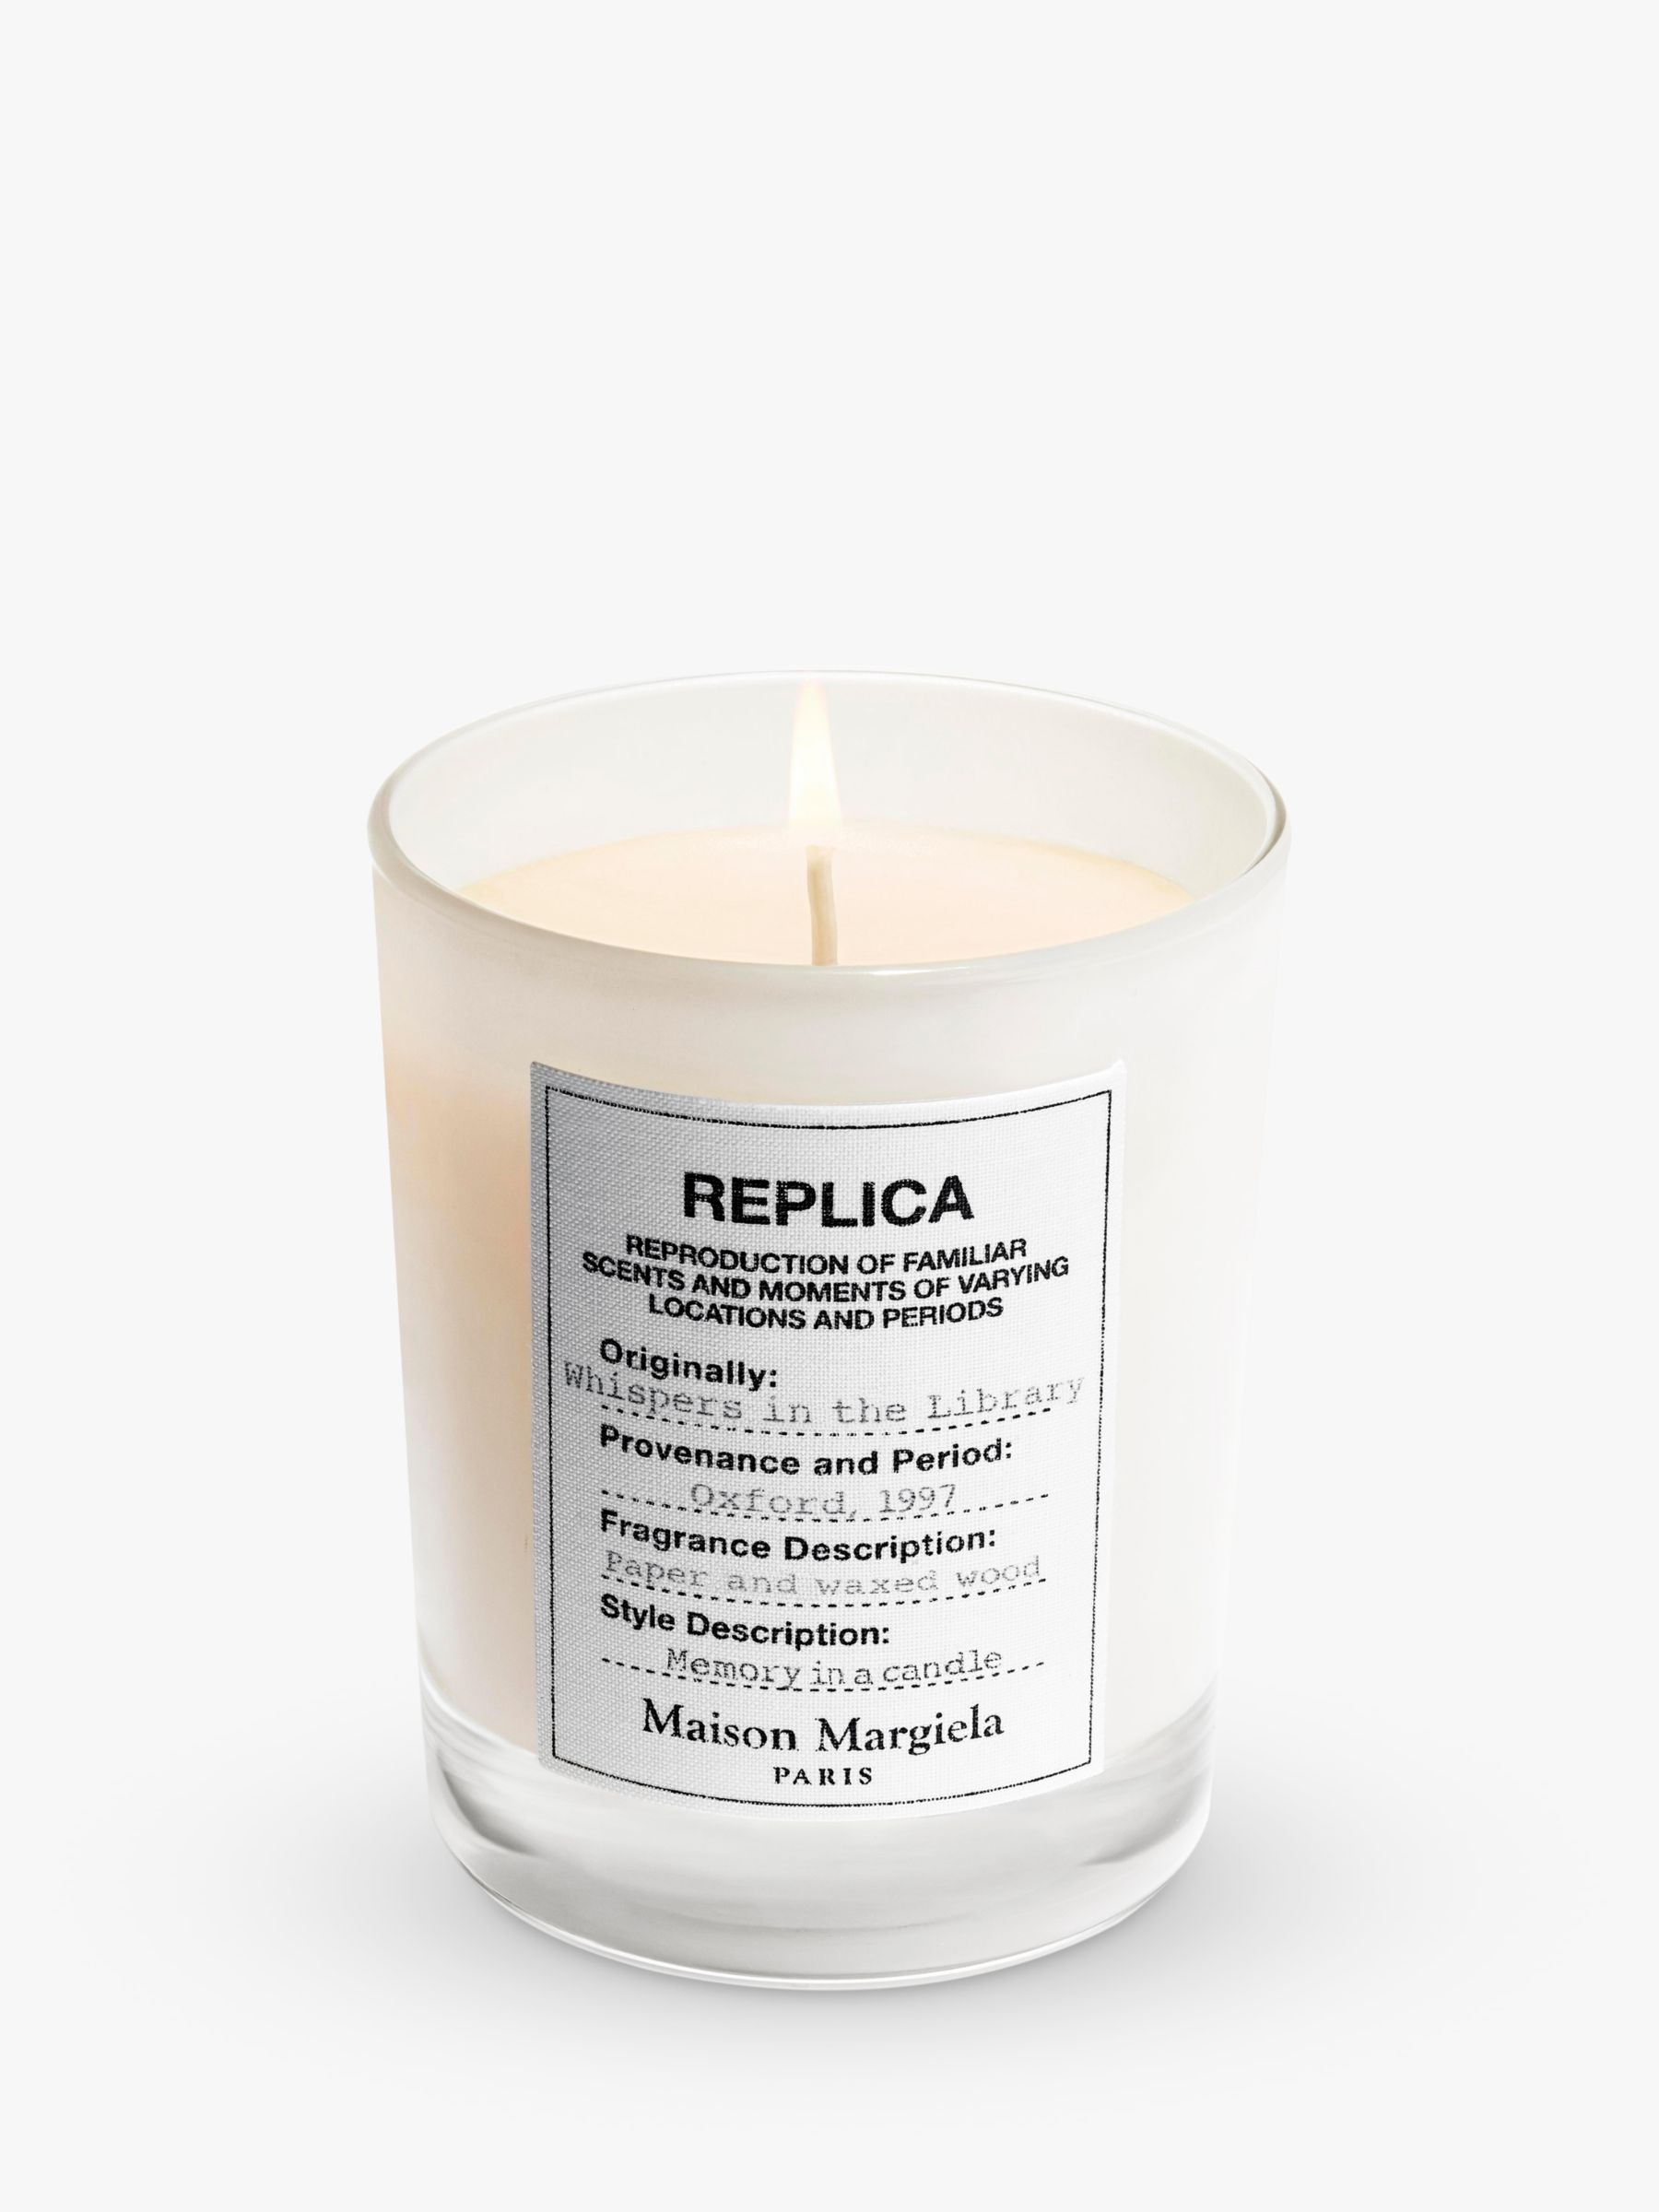 Maison Margiela Replica Whispers in the Library Candle, 165g at John ...